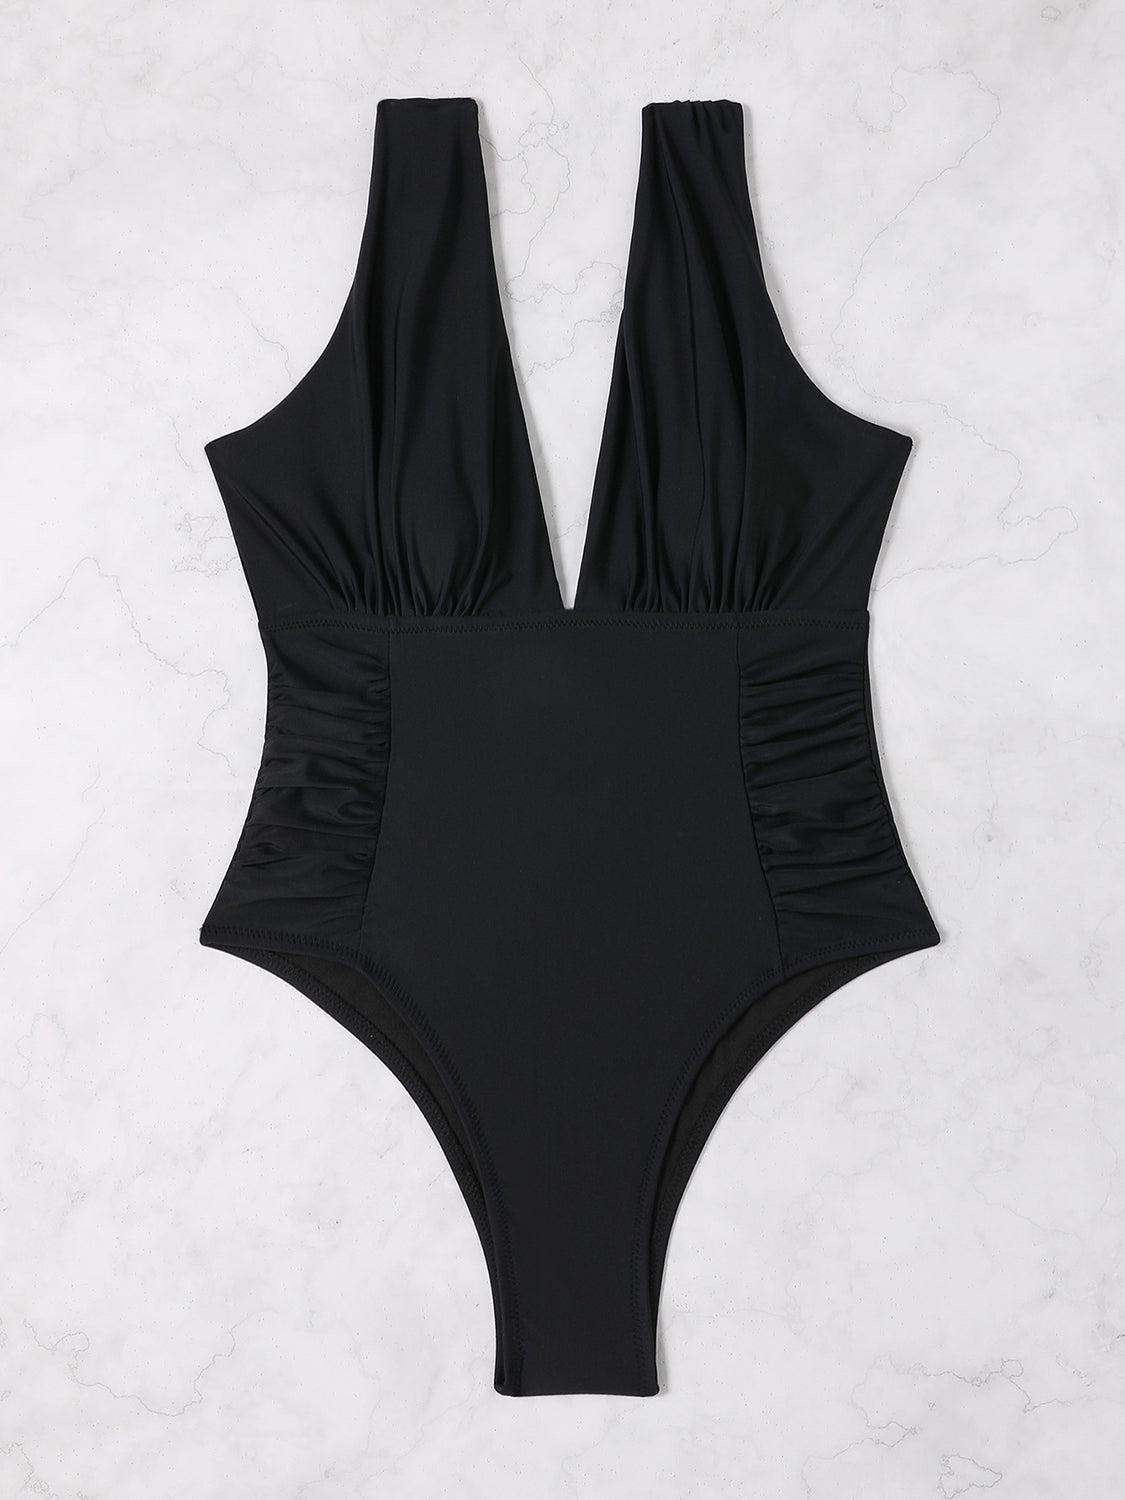 a black one piece swimsuit on a marble background